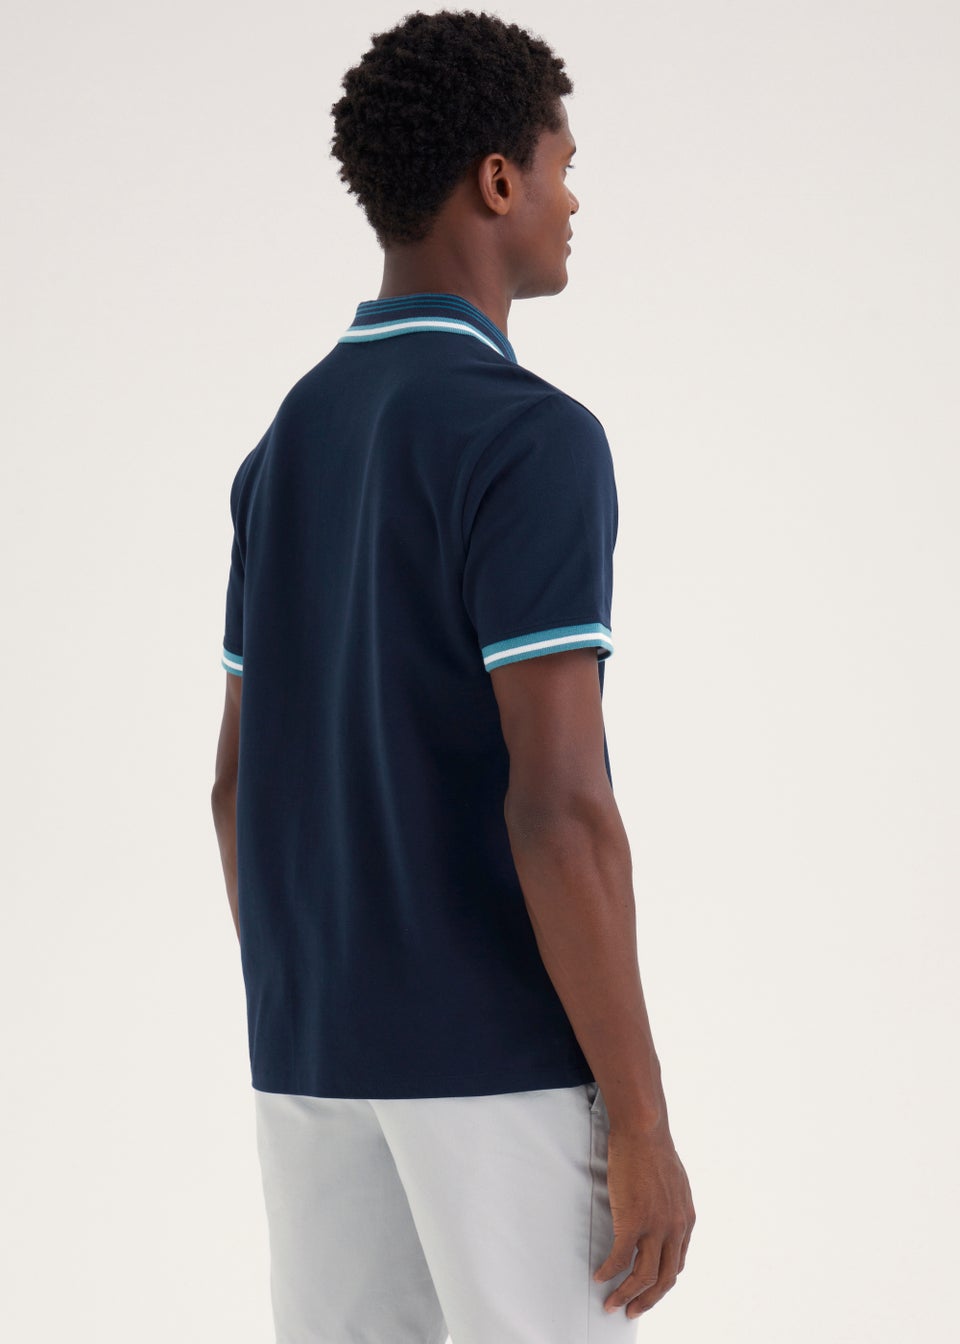 Navy Tipped Polo Shirt